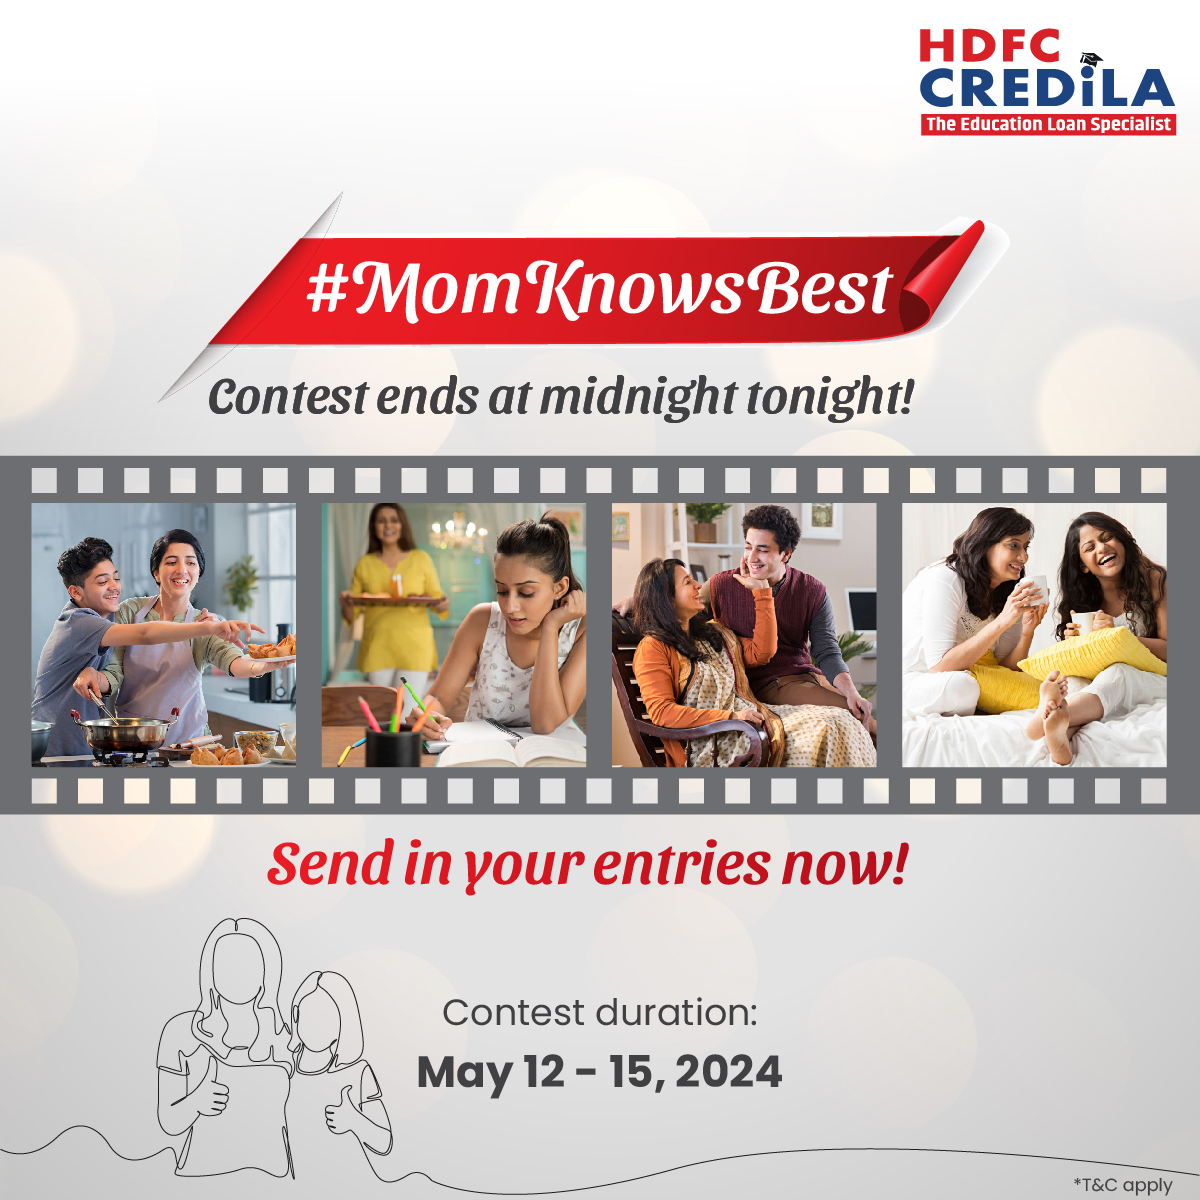 Watch this space - could you be the contest winner? *T&C apply bit.ly/3wwkmKv #HDFCCredila #HDFCCredilaContest #MomKnowsBest #Contest #Tips #Advice #comment #ContestAlert #ContestTime #GiveAway #GiveAwayAlert #ContestGiveAway #GiveawayContest #CommentContest